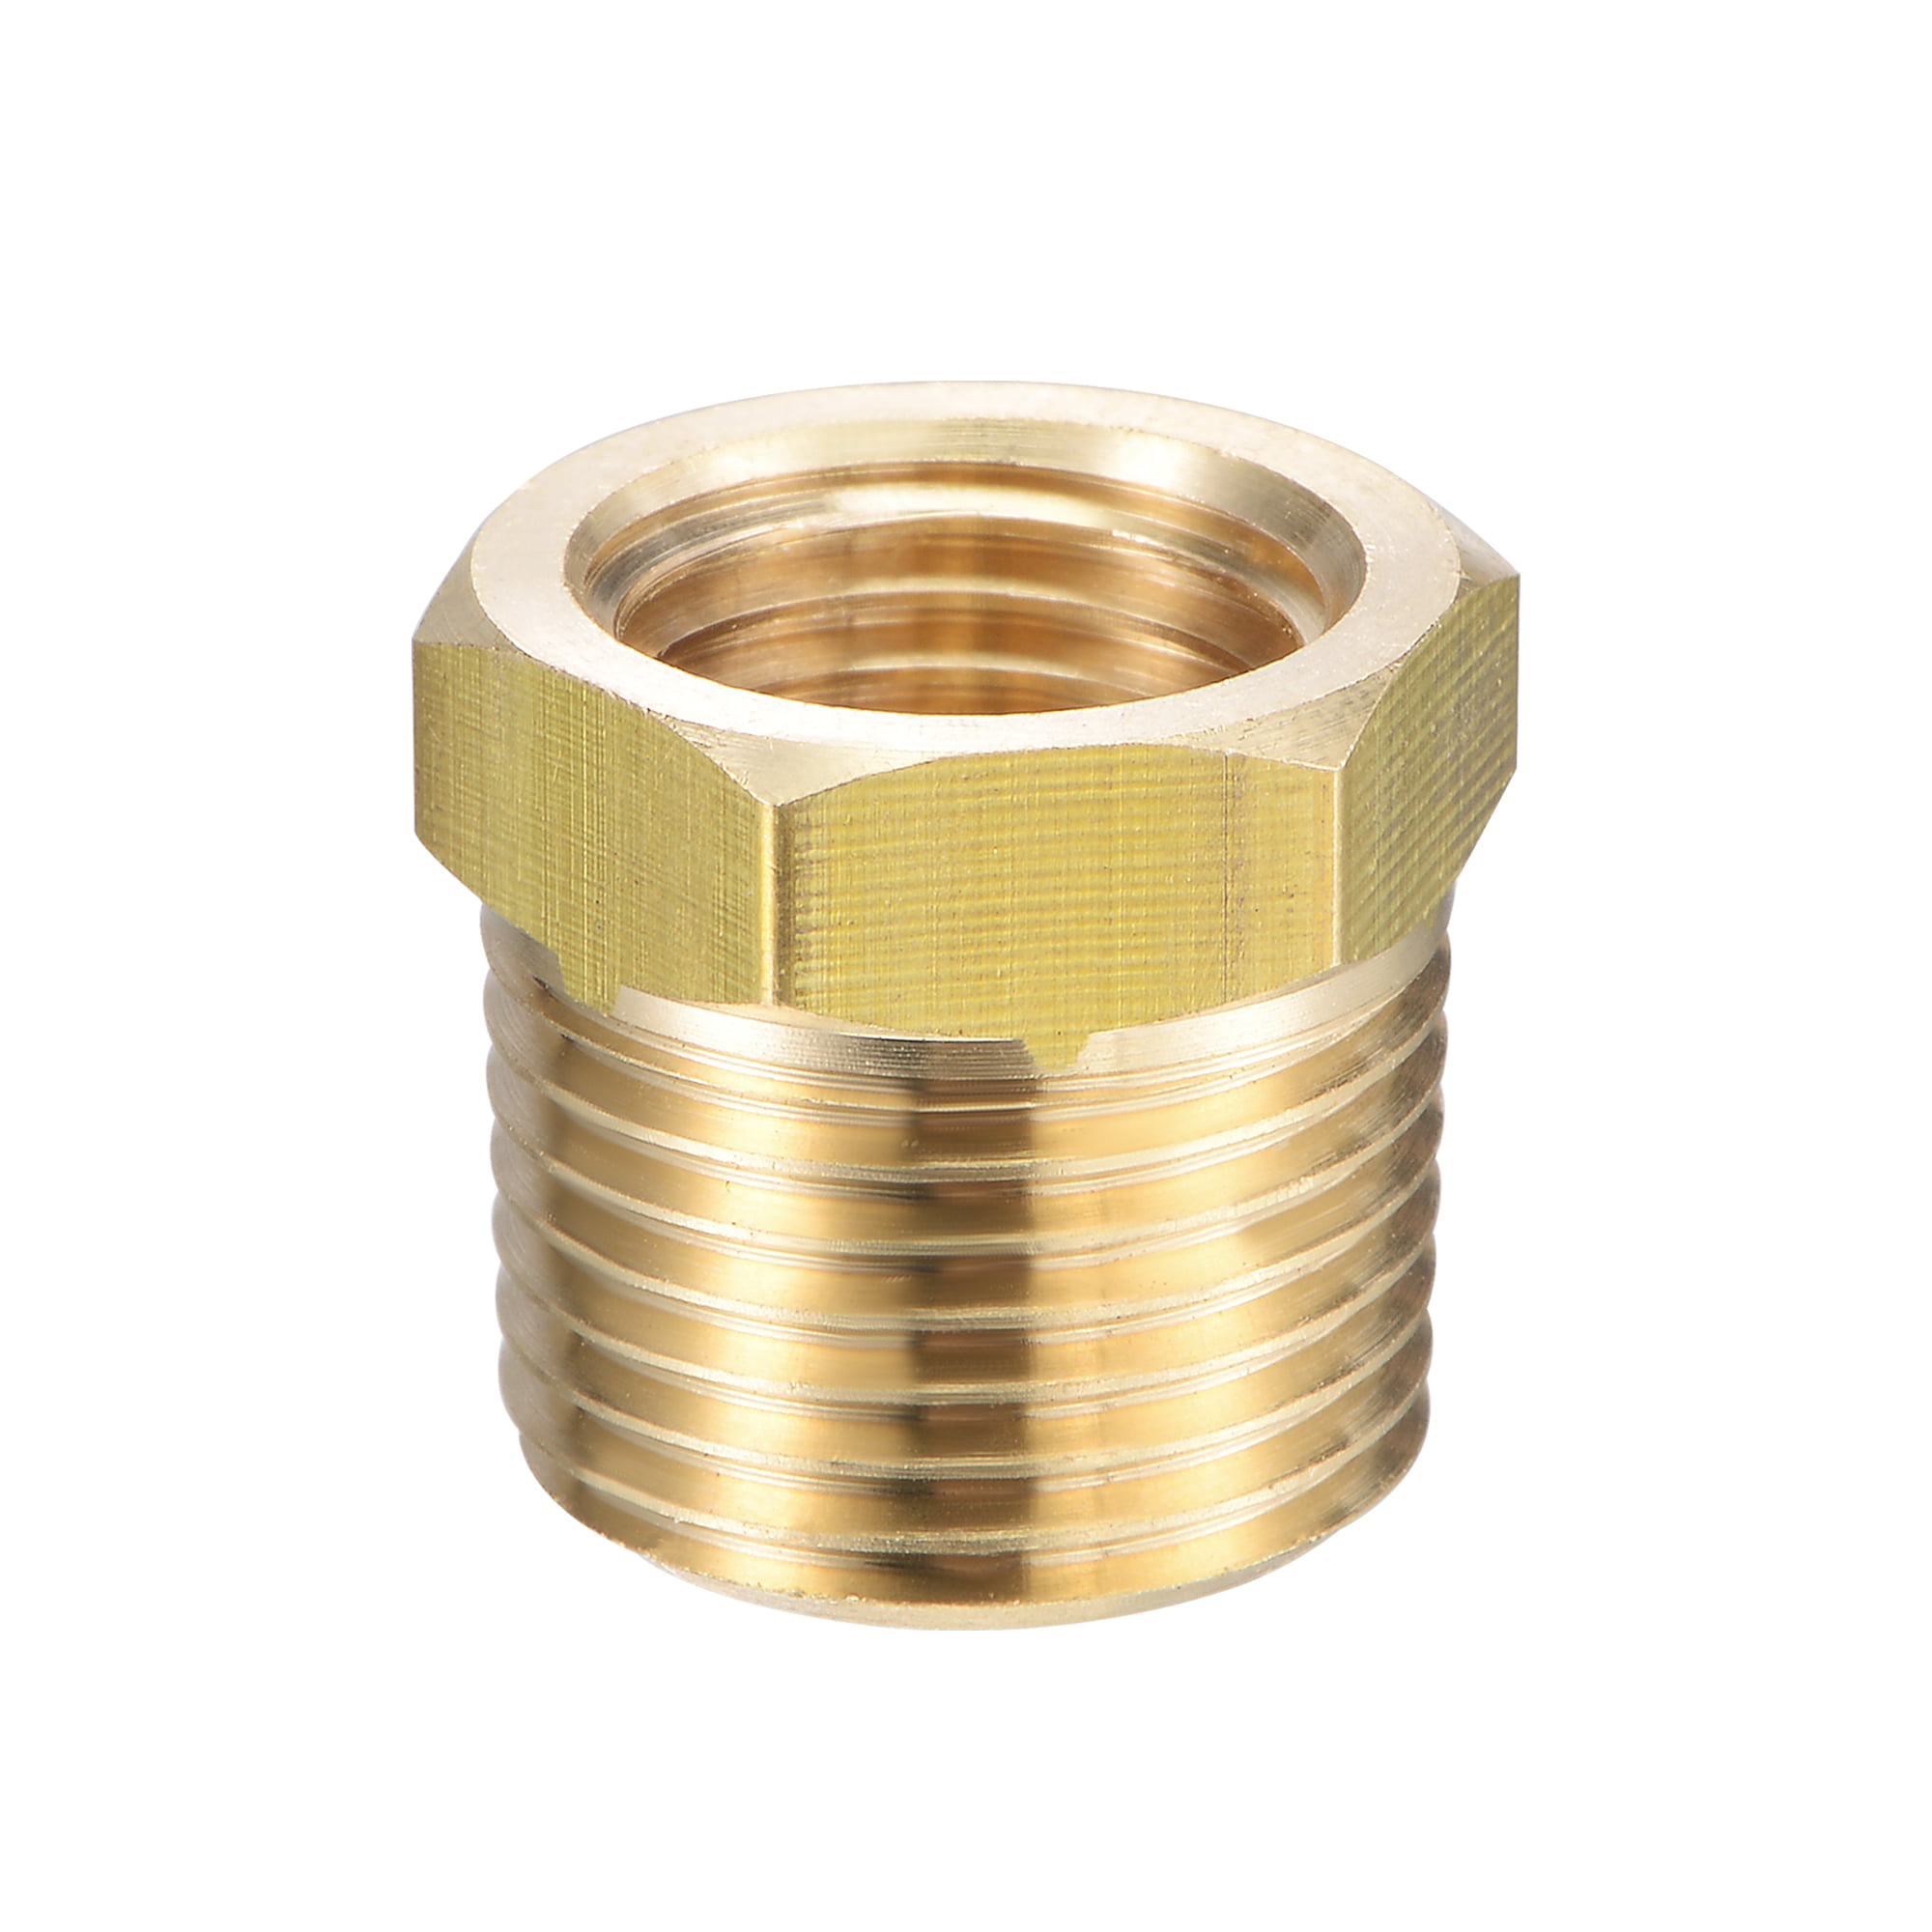 BRASS HEX BUSHING REDUCING NPT THREADS PIPE FITTING 1/4 MALE X 1/8 FEMALE QTY 25 